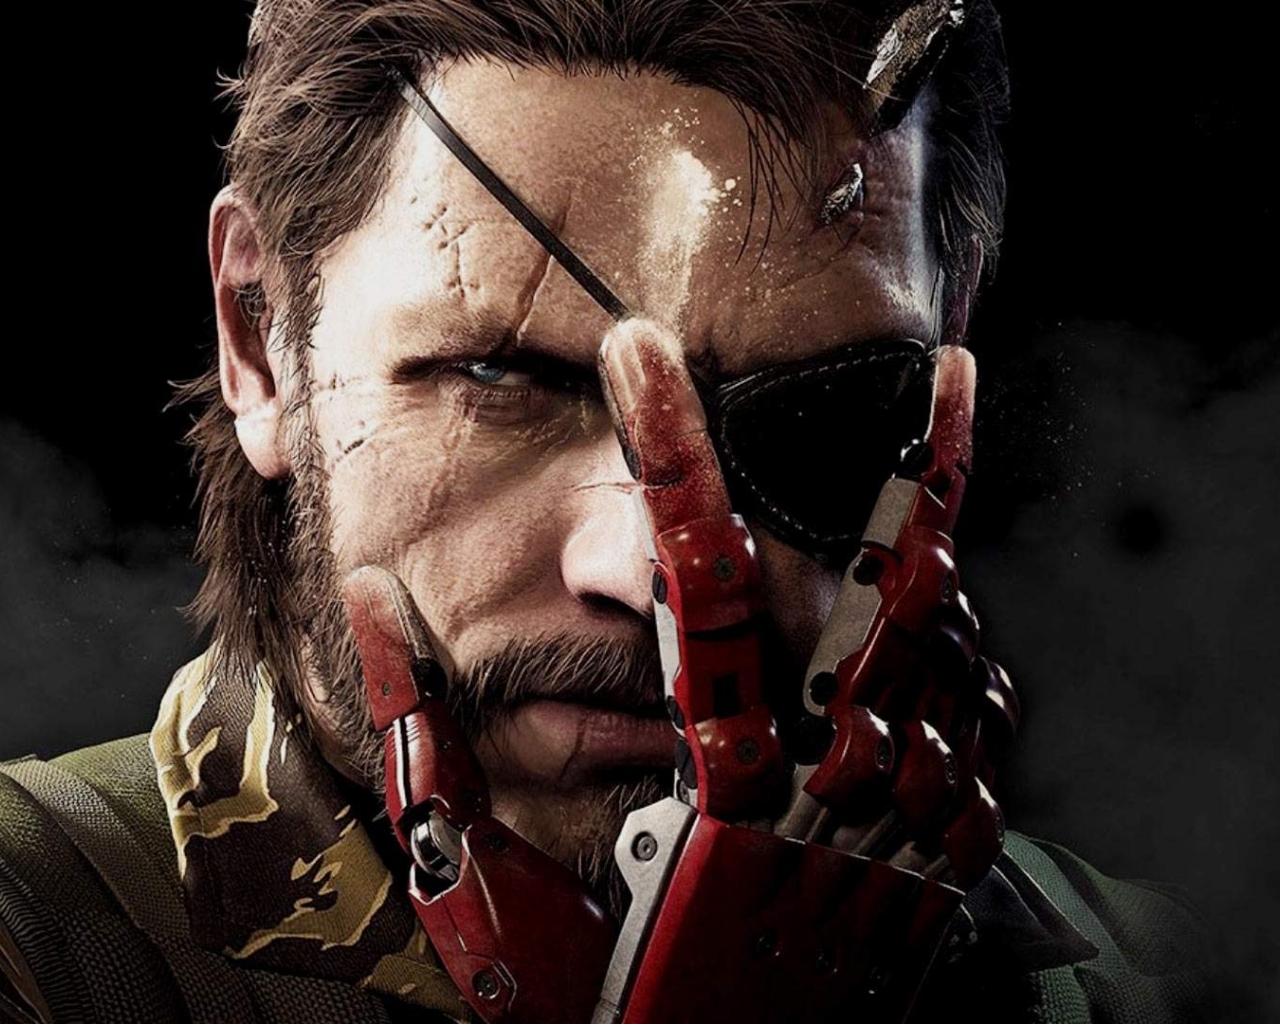 1280x1024 the phantom pain metal gear solid v 1280x1024 resolution wallpaper hd games 4k wallpapers images photos and background 1280x1024 the phantom pain metal gear